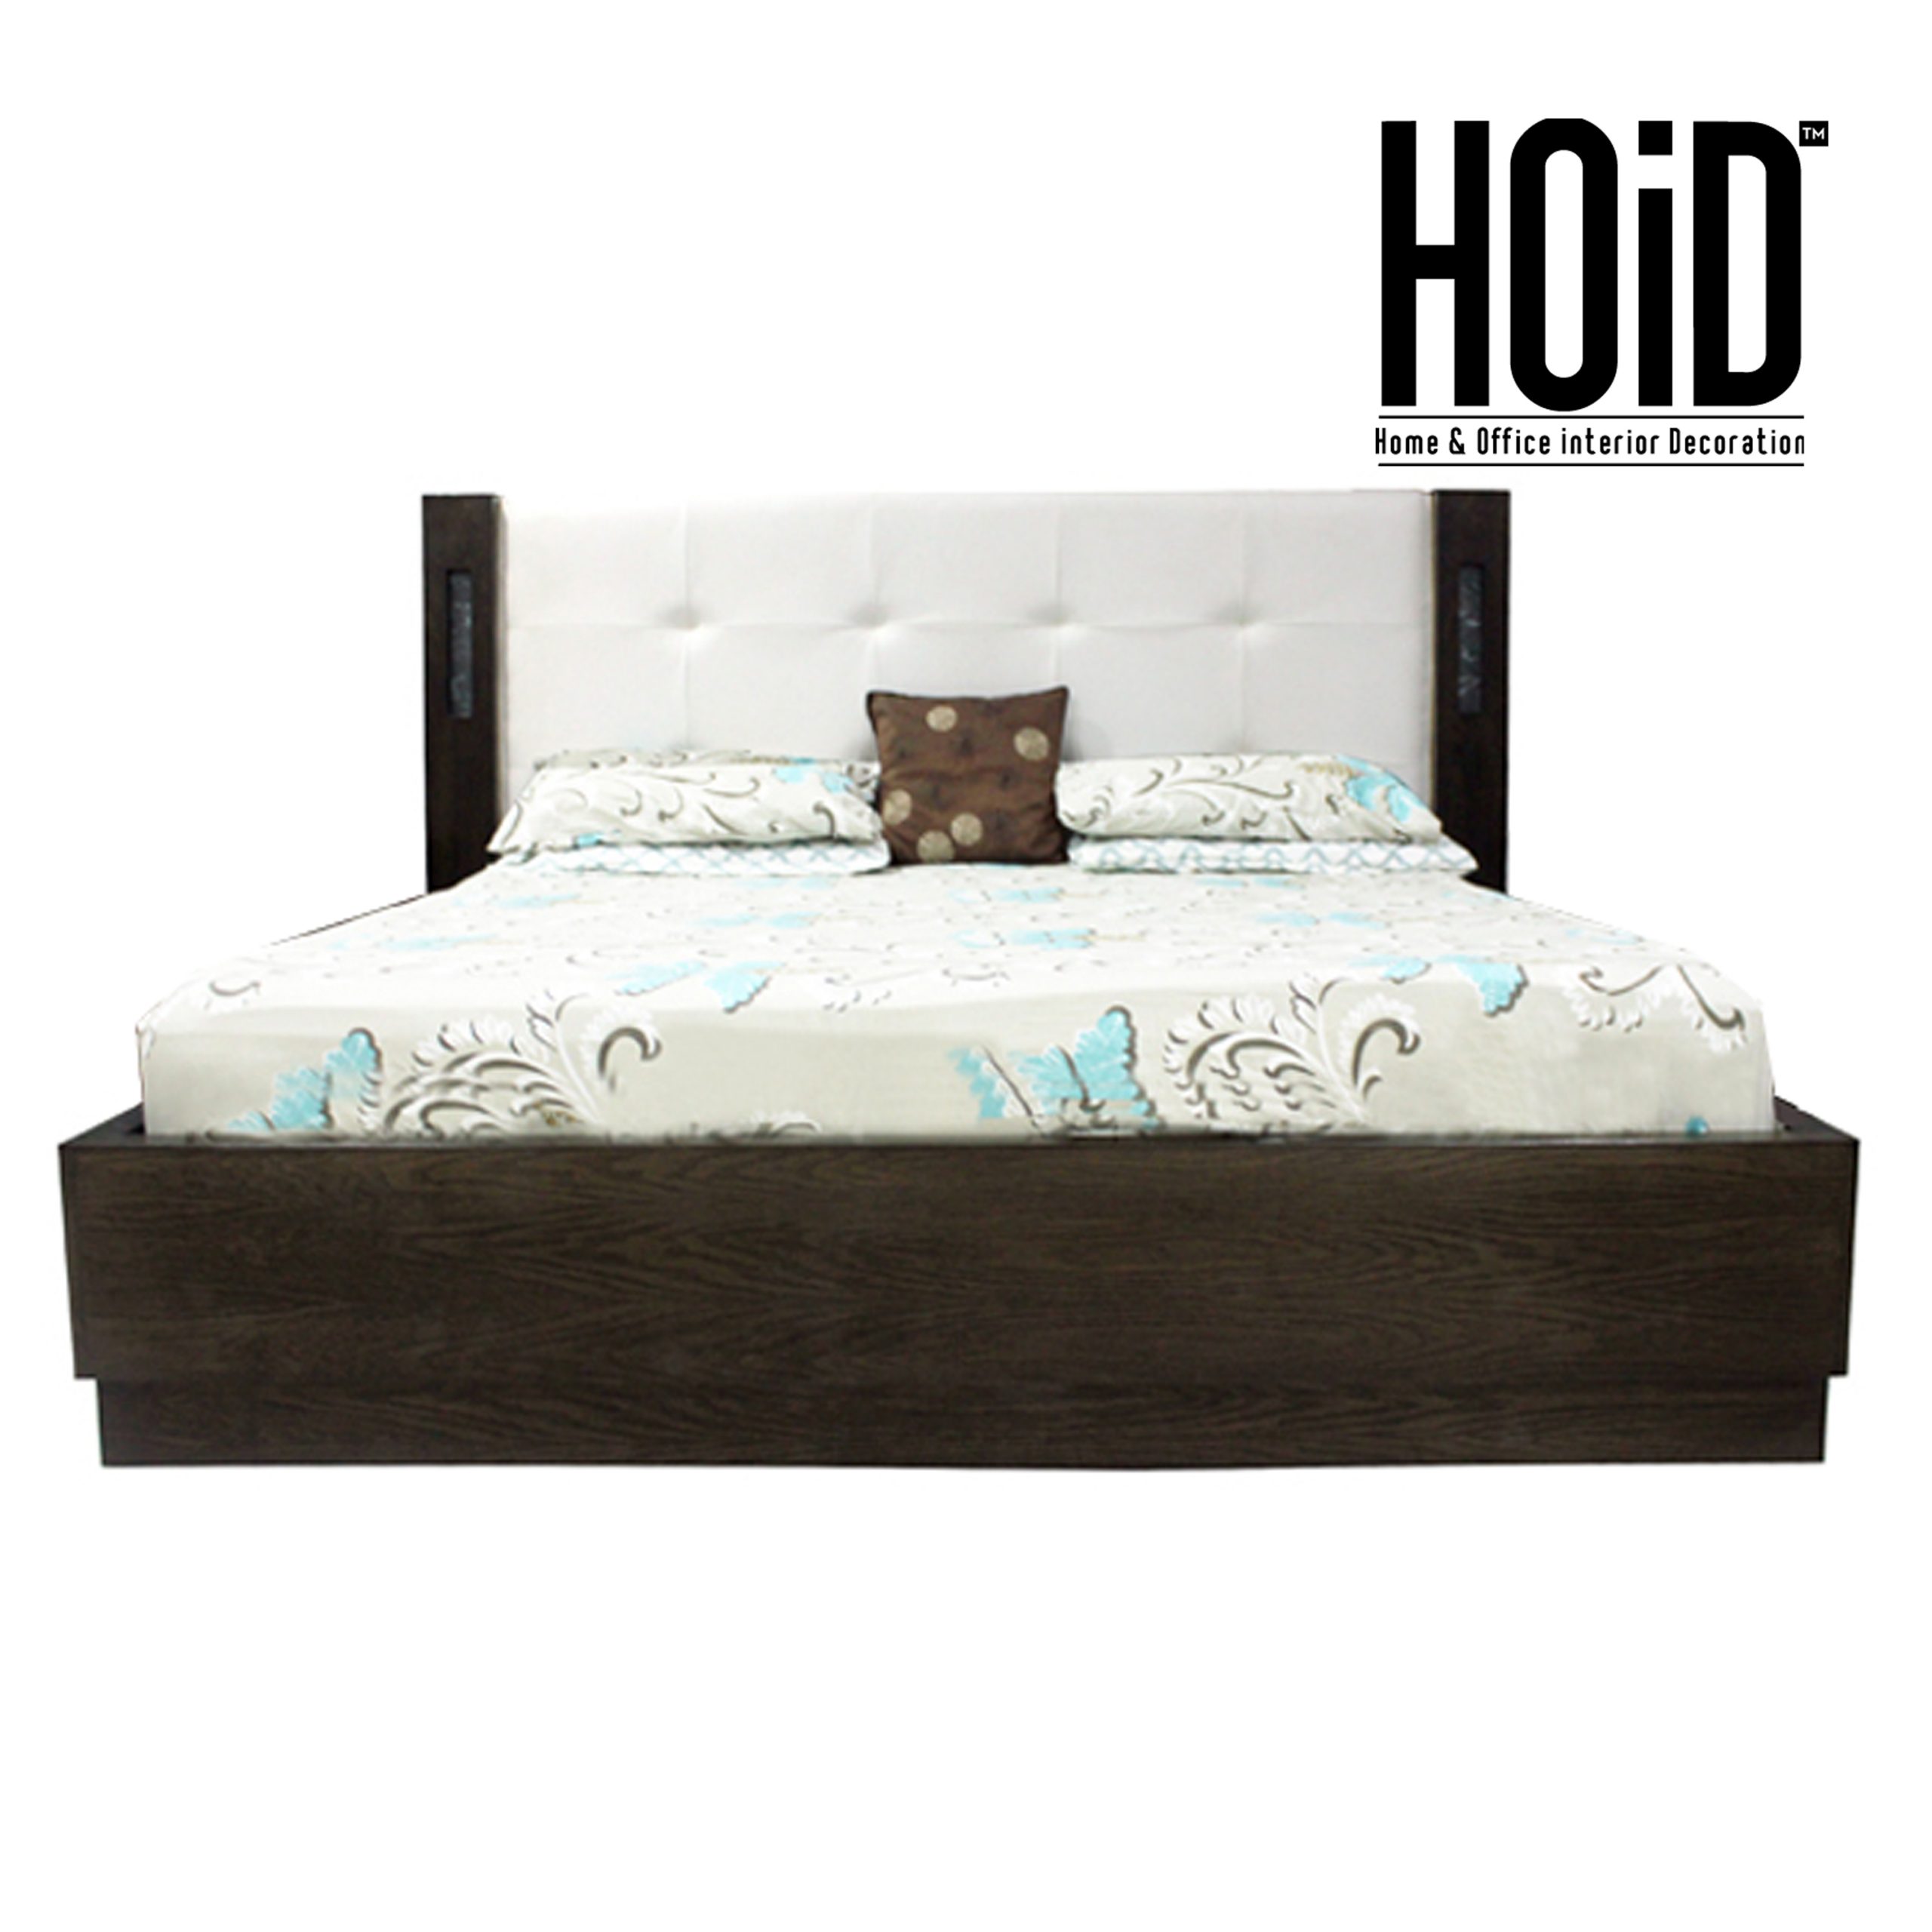 icon-bed-king-size-scaled-2.jpg